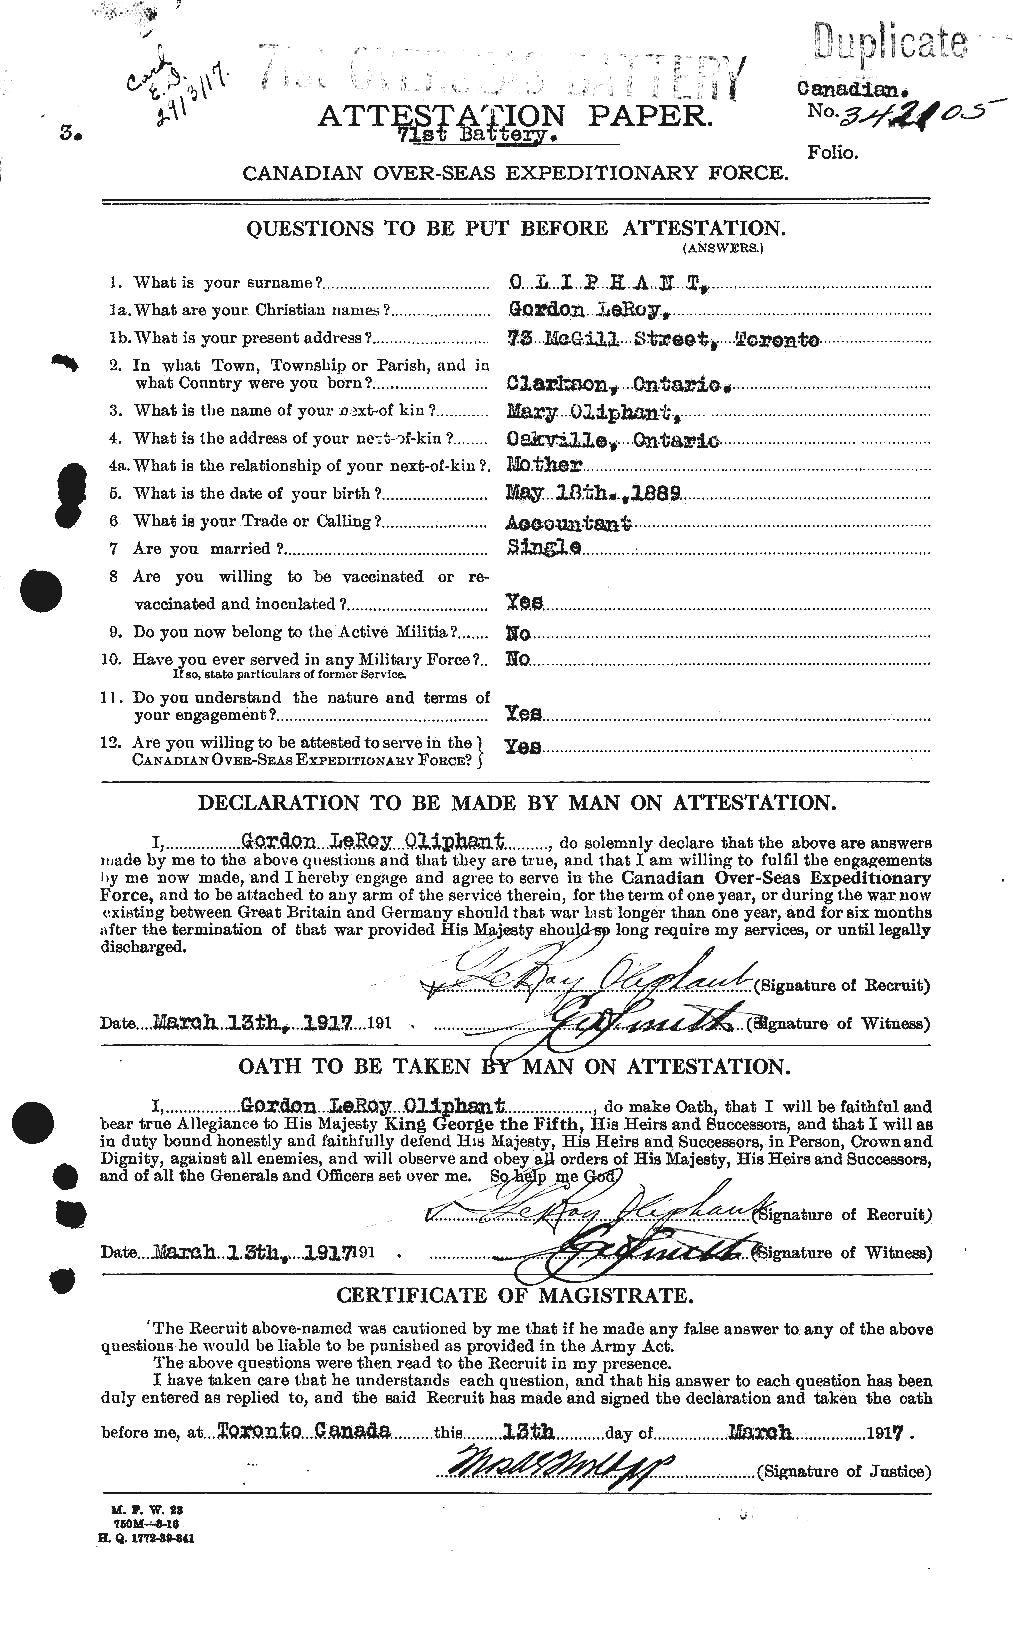 Personnel Records of the First World War - CEF 557058a